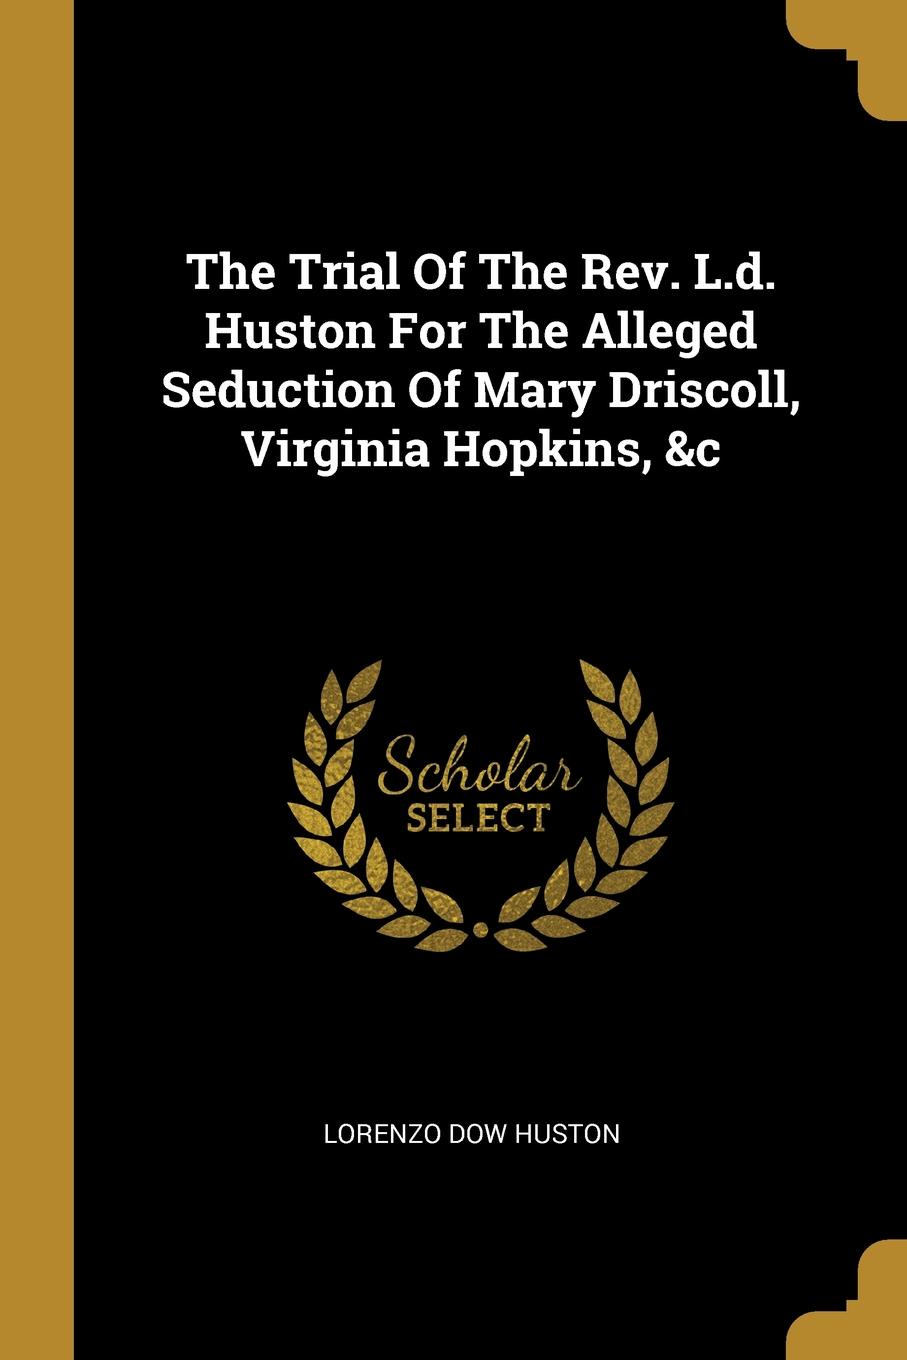 The Trial Of The Rev. L.d. Huston For The Alleged Seduction Of Mary Driscoll, Virginia Hopkins, .c